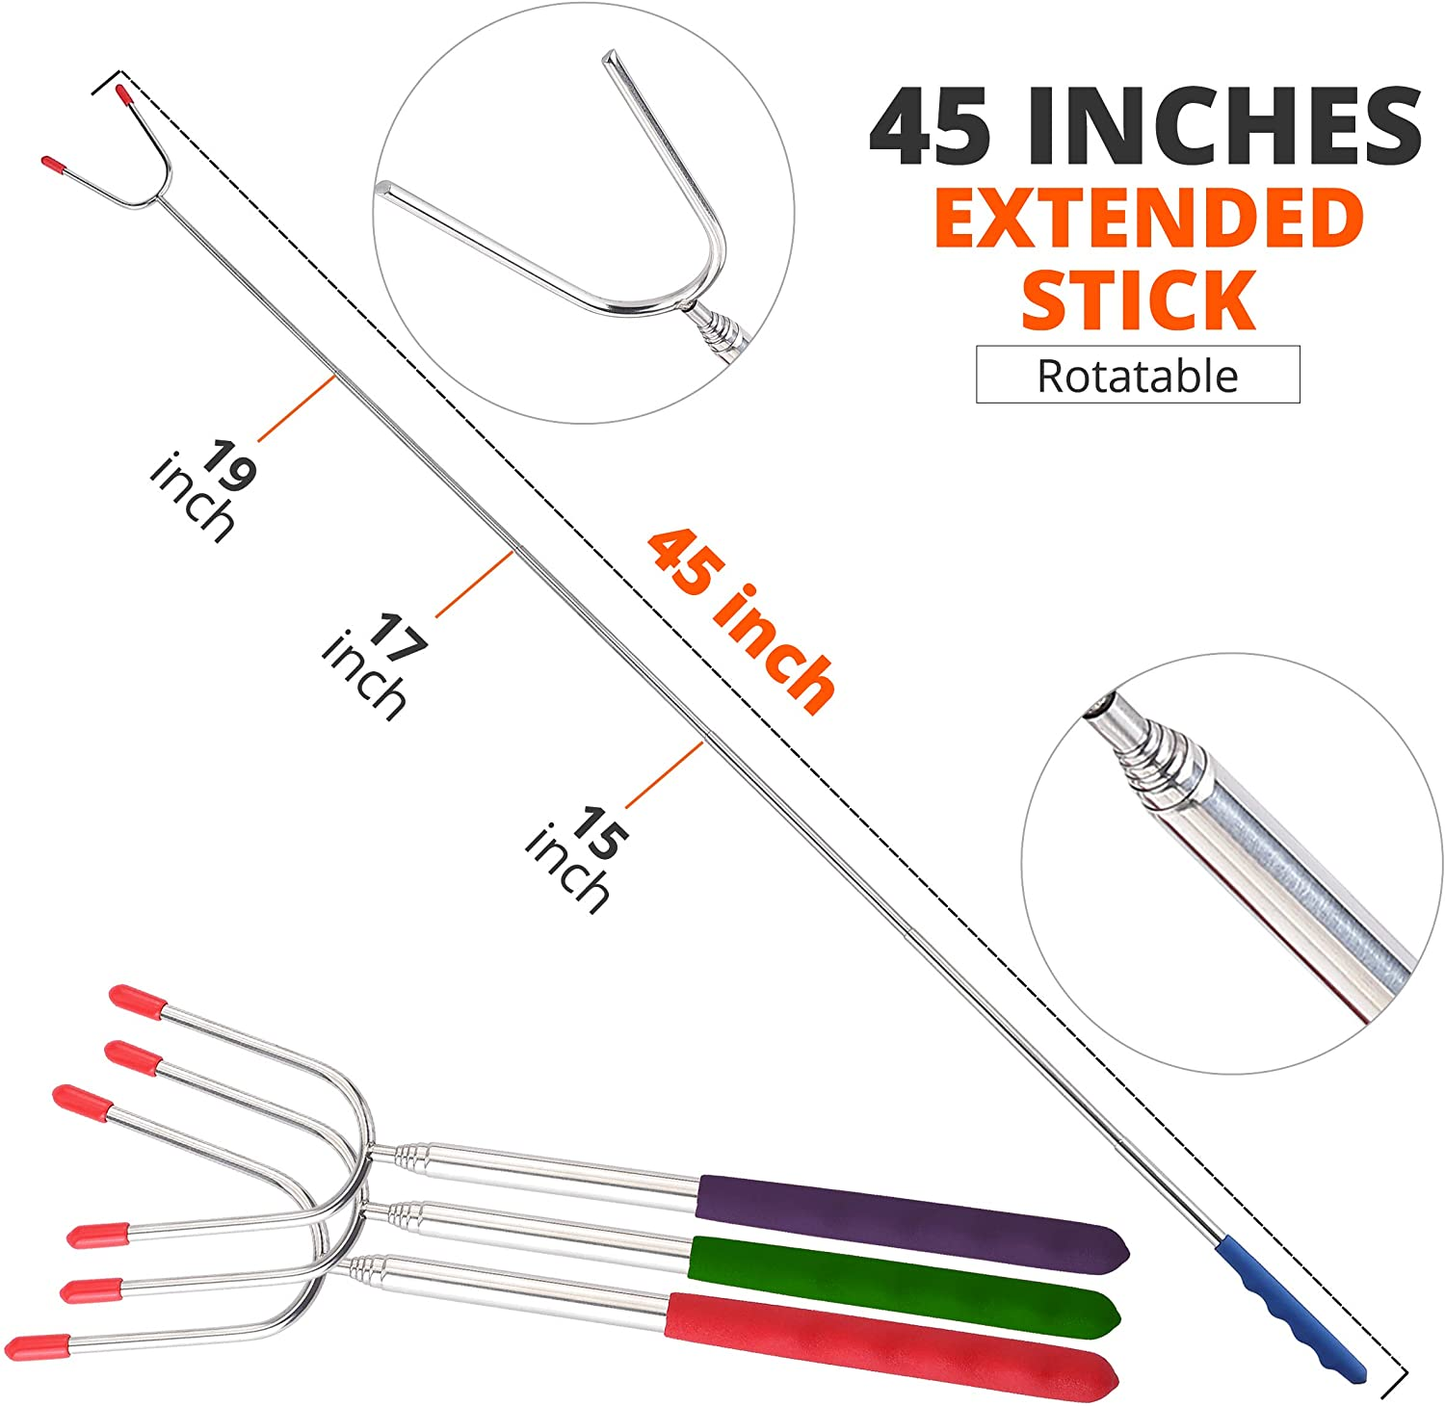 Marshmallow Roasting Sticks for Fire Pit- Extra Long 45 Inches- Pack of 4 Extendable Forks- Telescoping Smores Sticks, Stainless Steel Hot Dog Sticks for Campfire, Fire Pit Tools for Camping